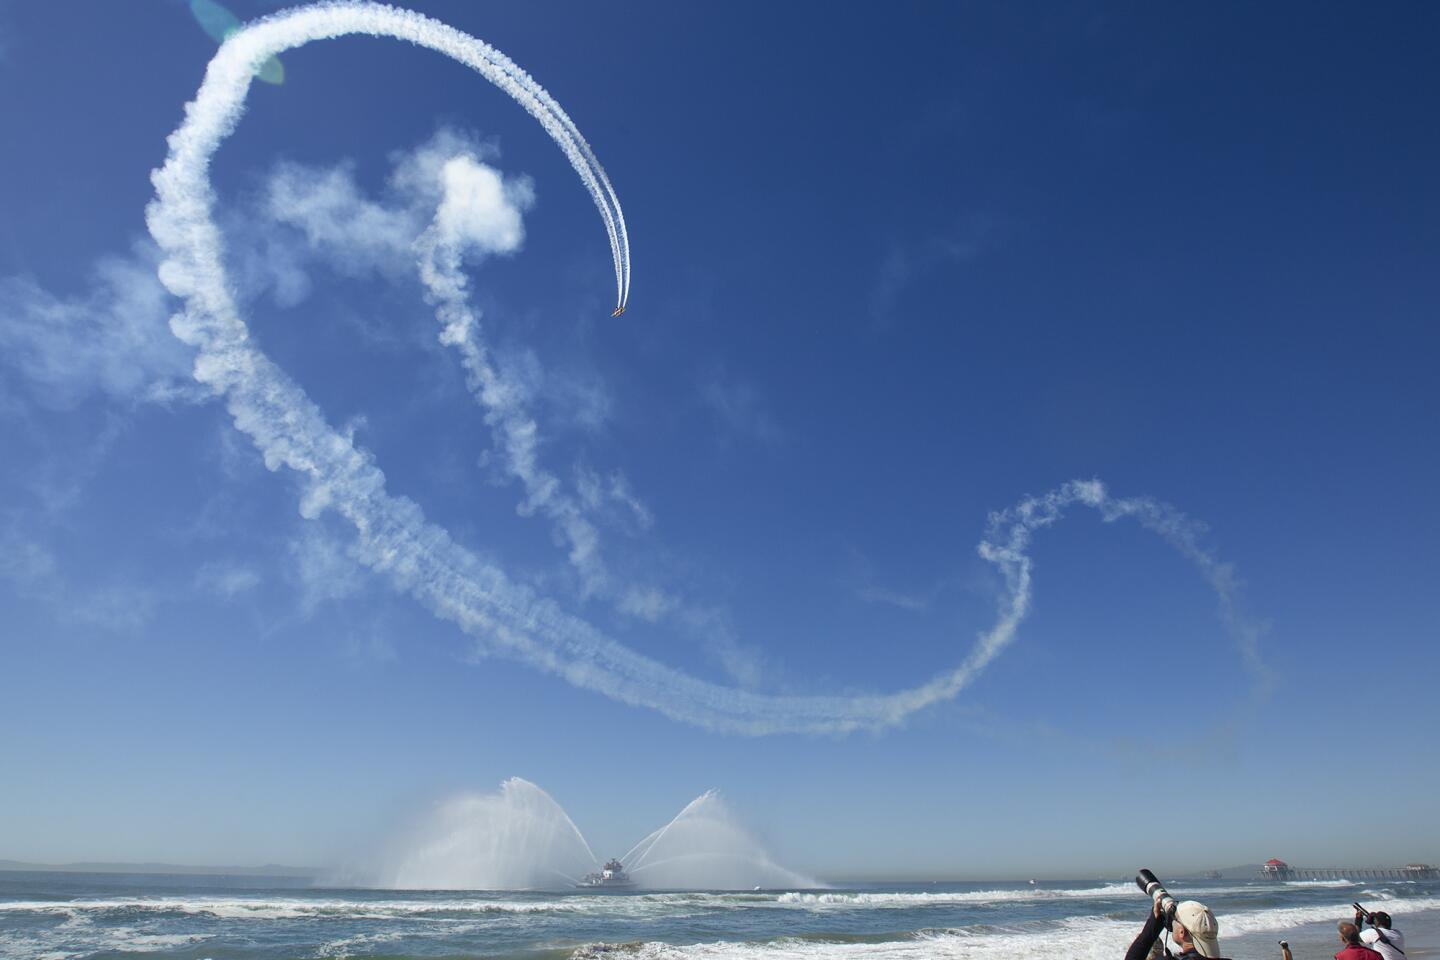 Photo Gallery: The Great Pacific Airshow